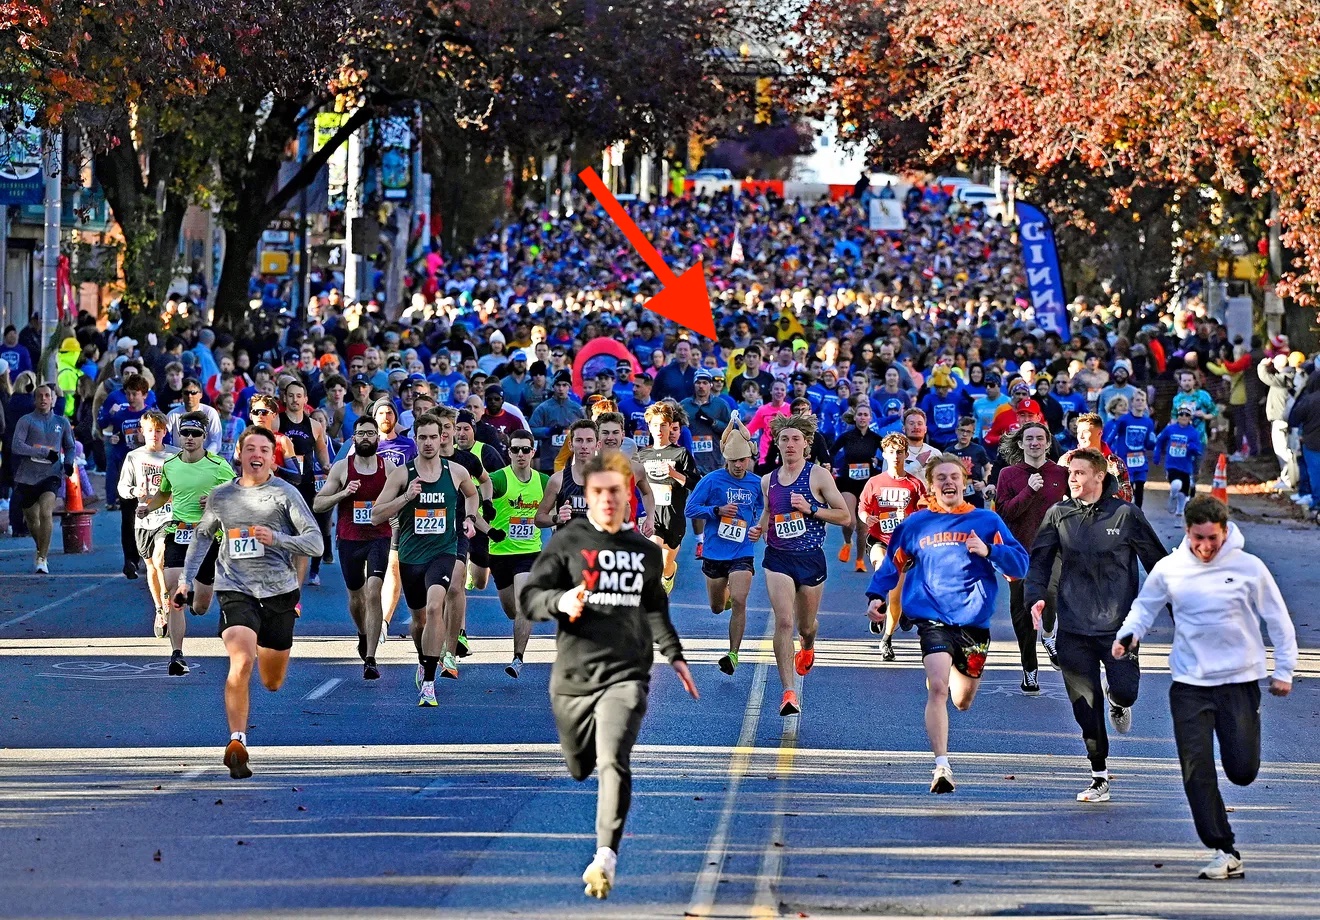 The Turkey Trot crowd running from the starting line, my corn costume
emerging in the background.